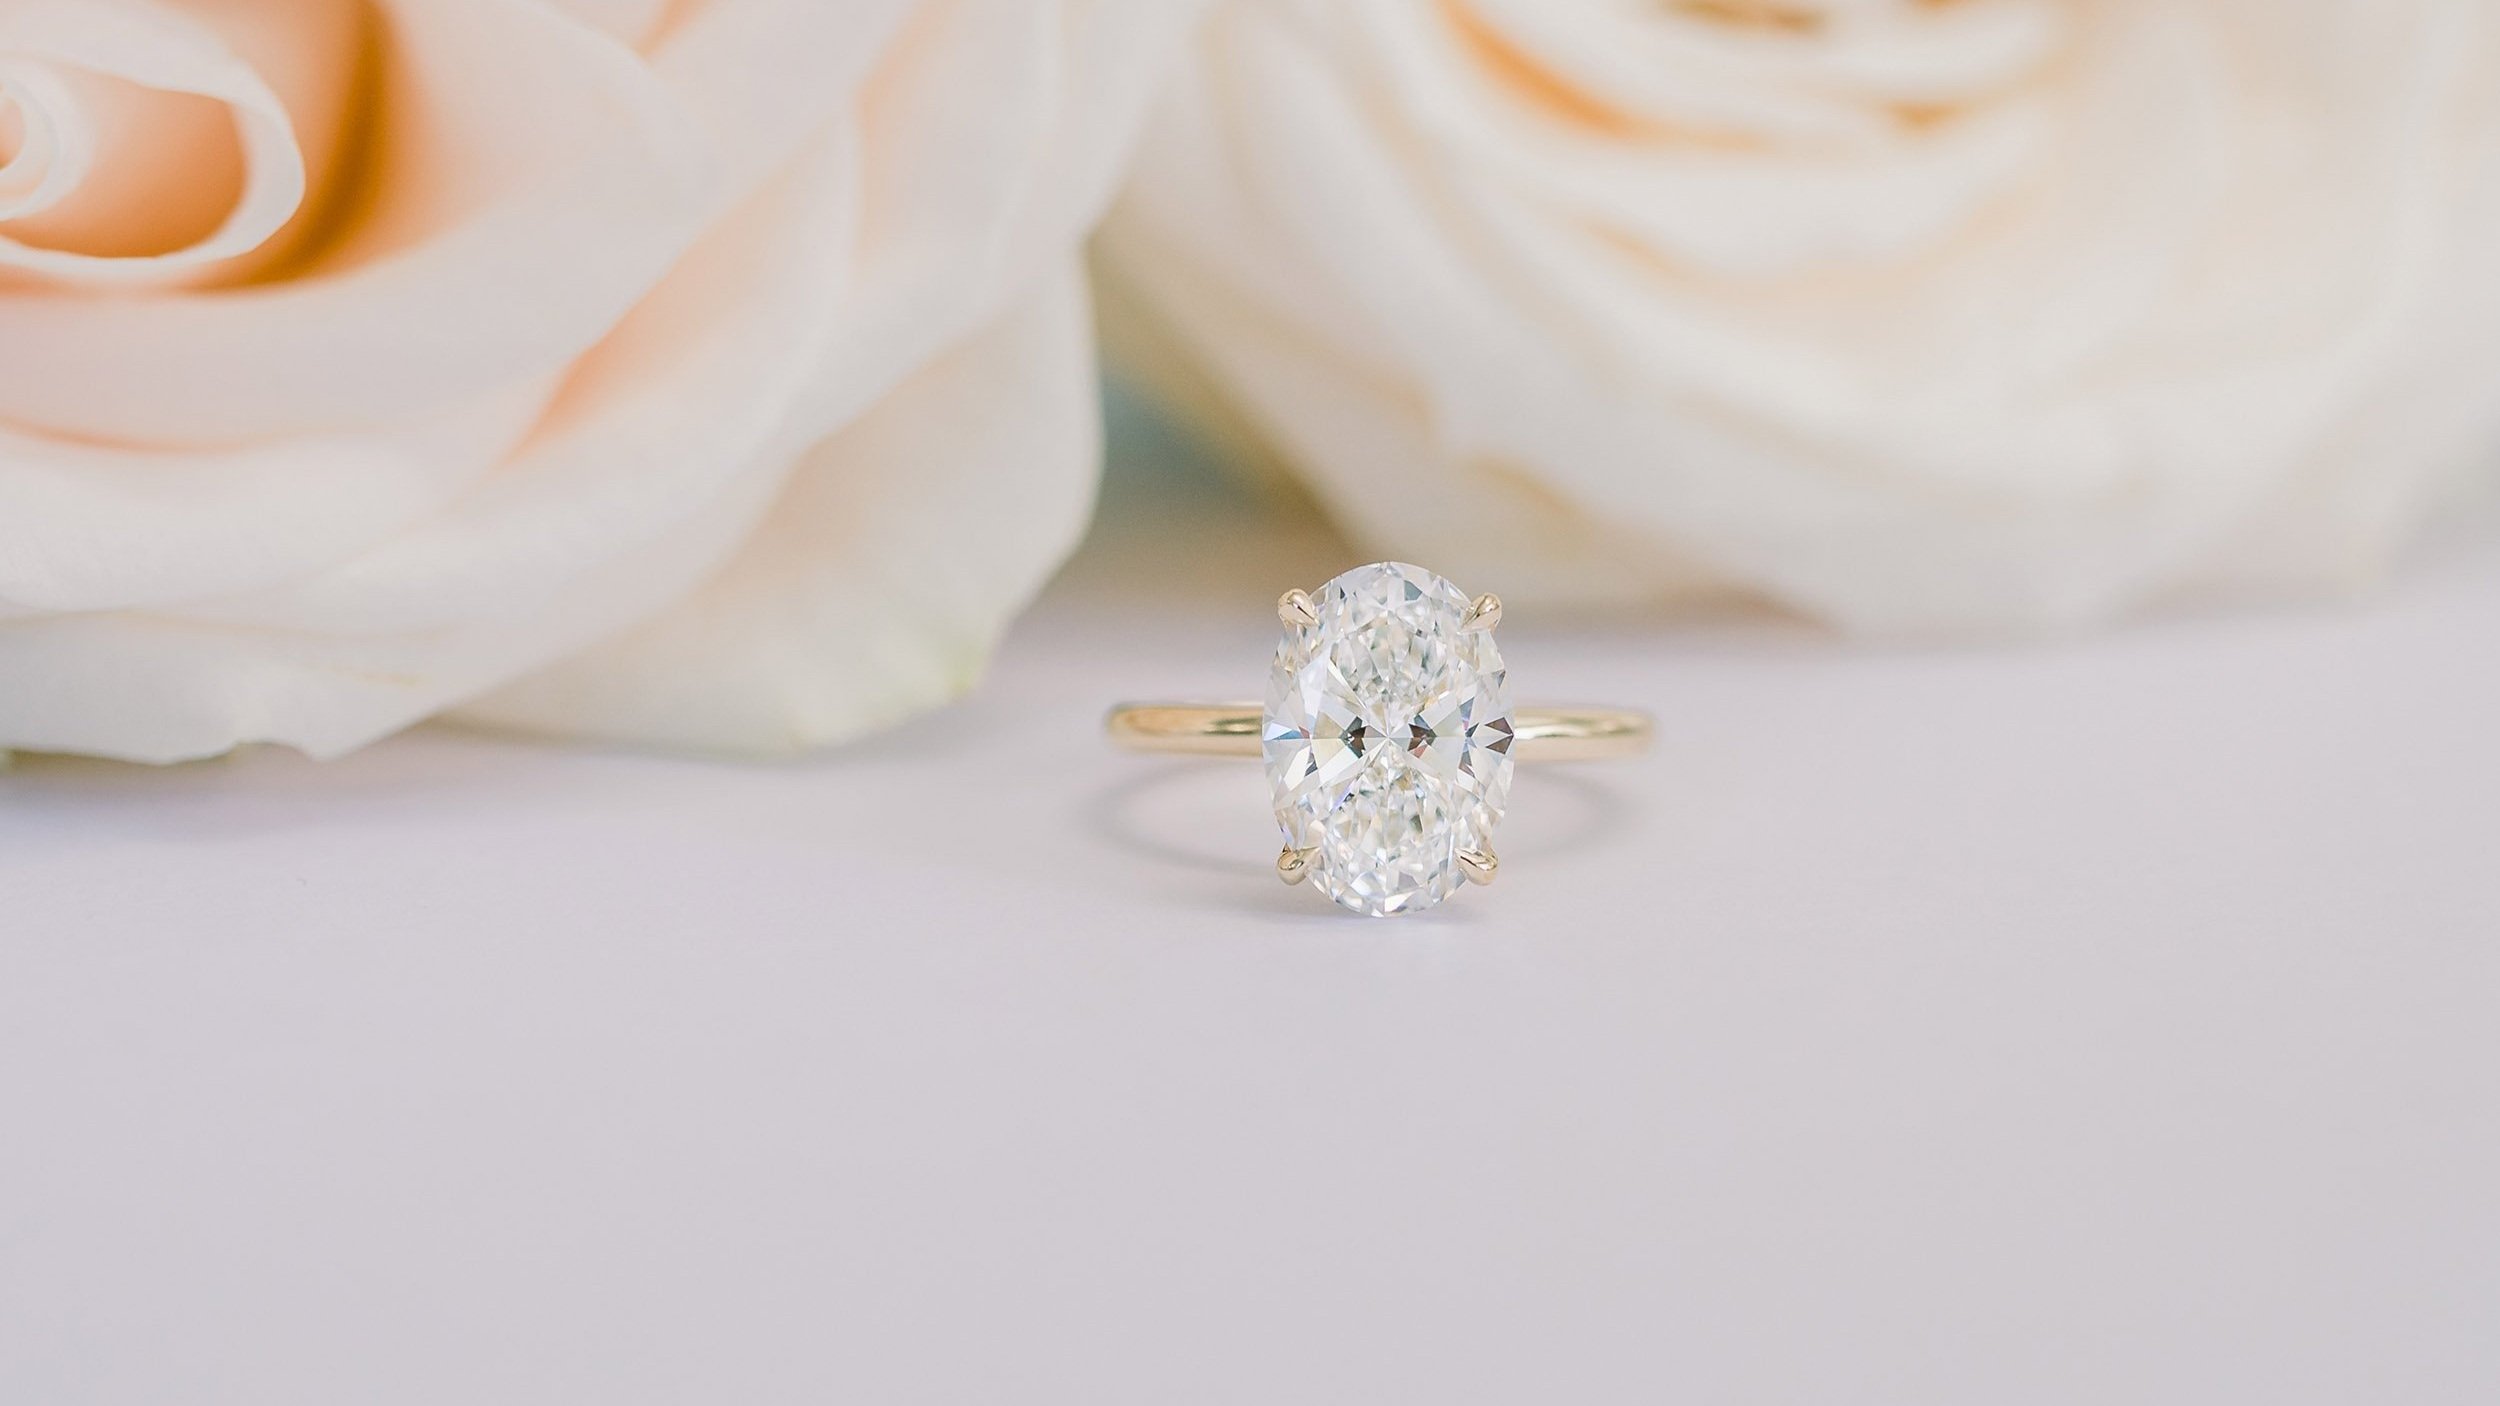 Lab Diamond Engagement Ring Style Guide